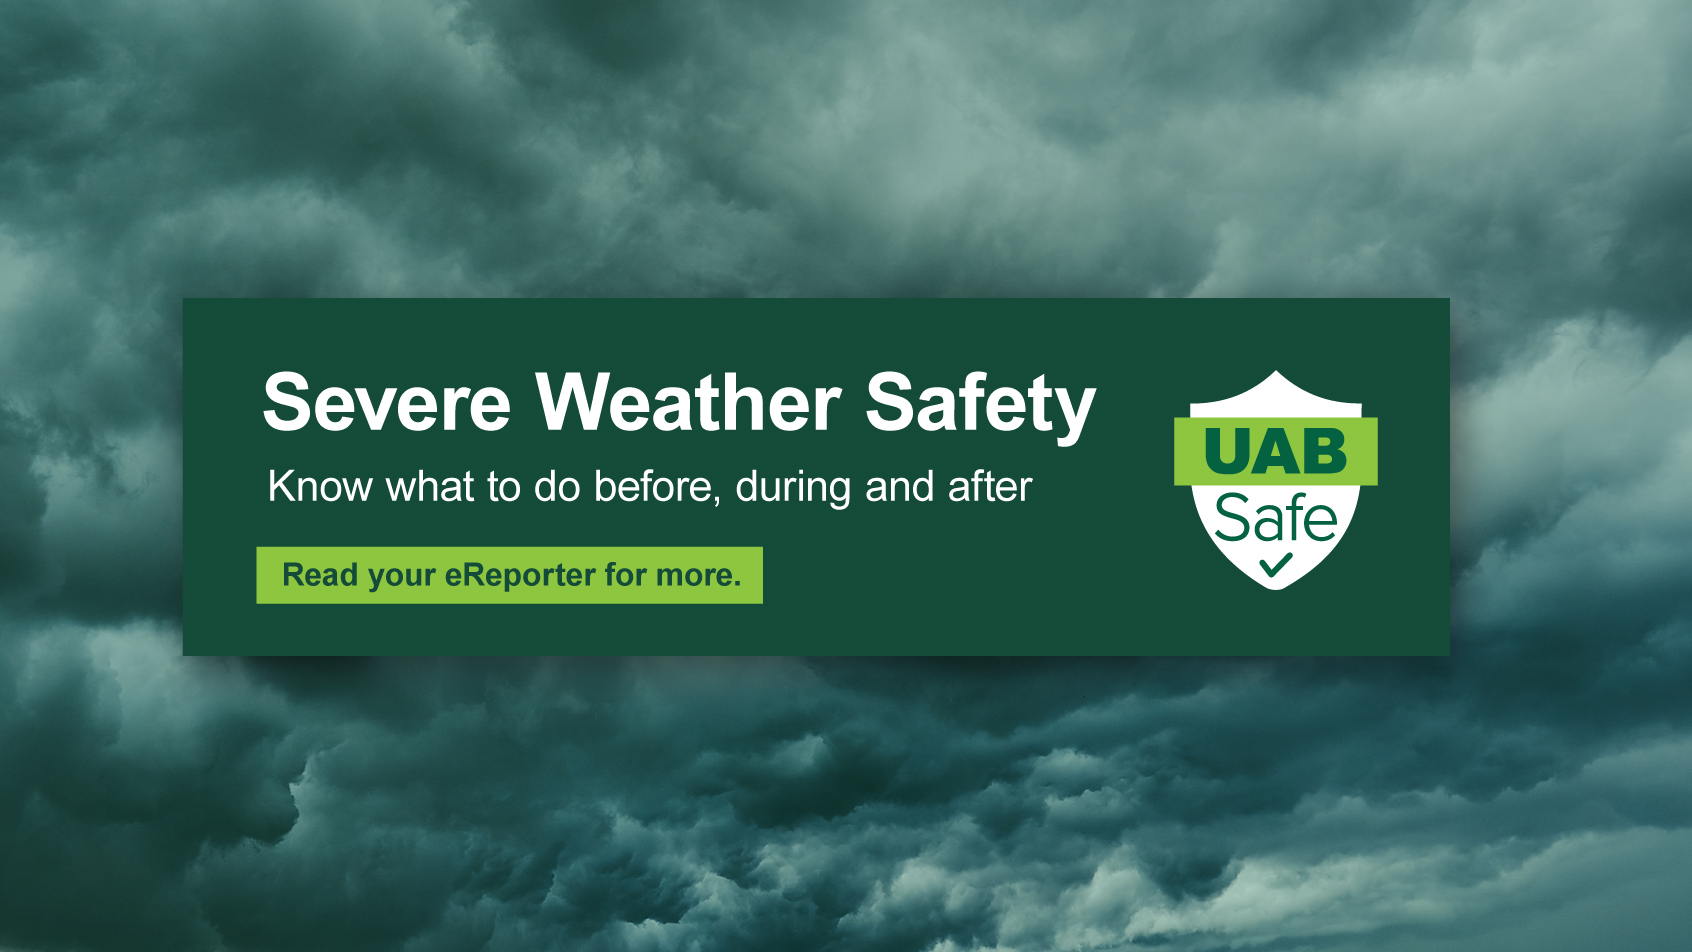 Severe Weather Safety: Know what to do before, during, and after. Read your eReporter for more. UAB Safe.